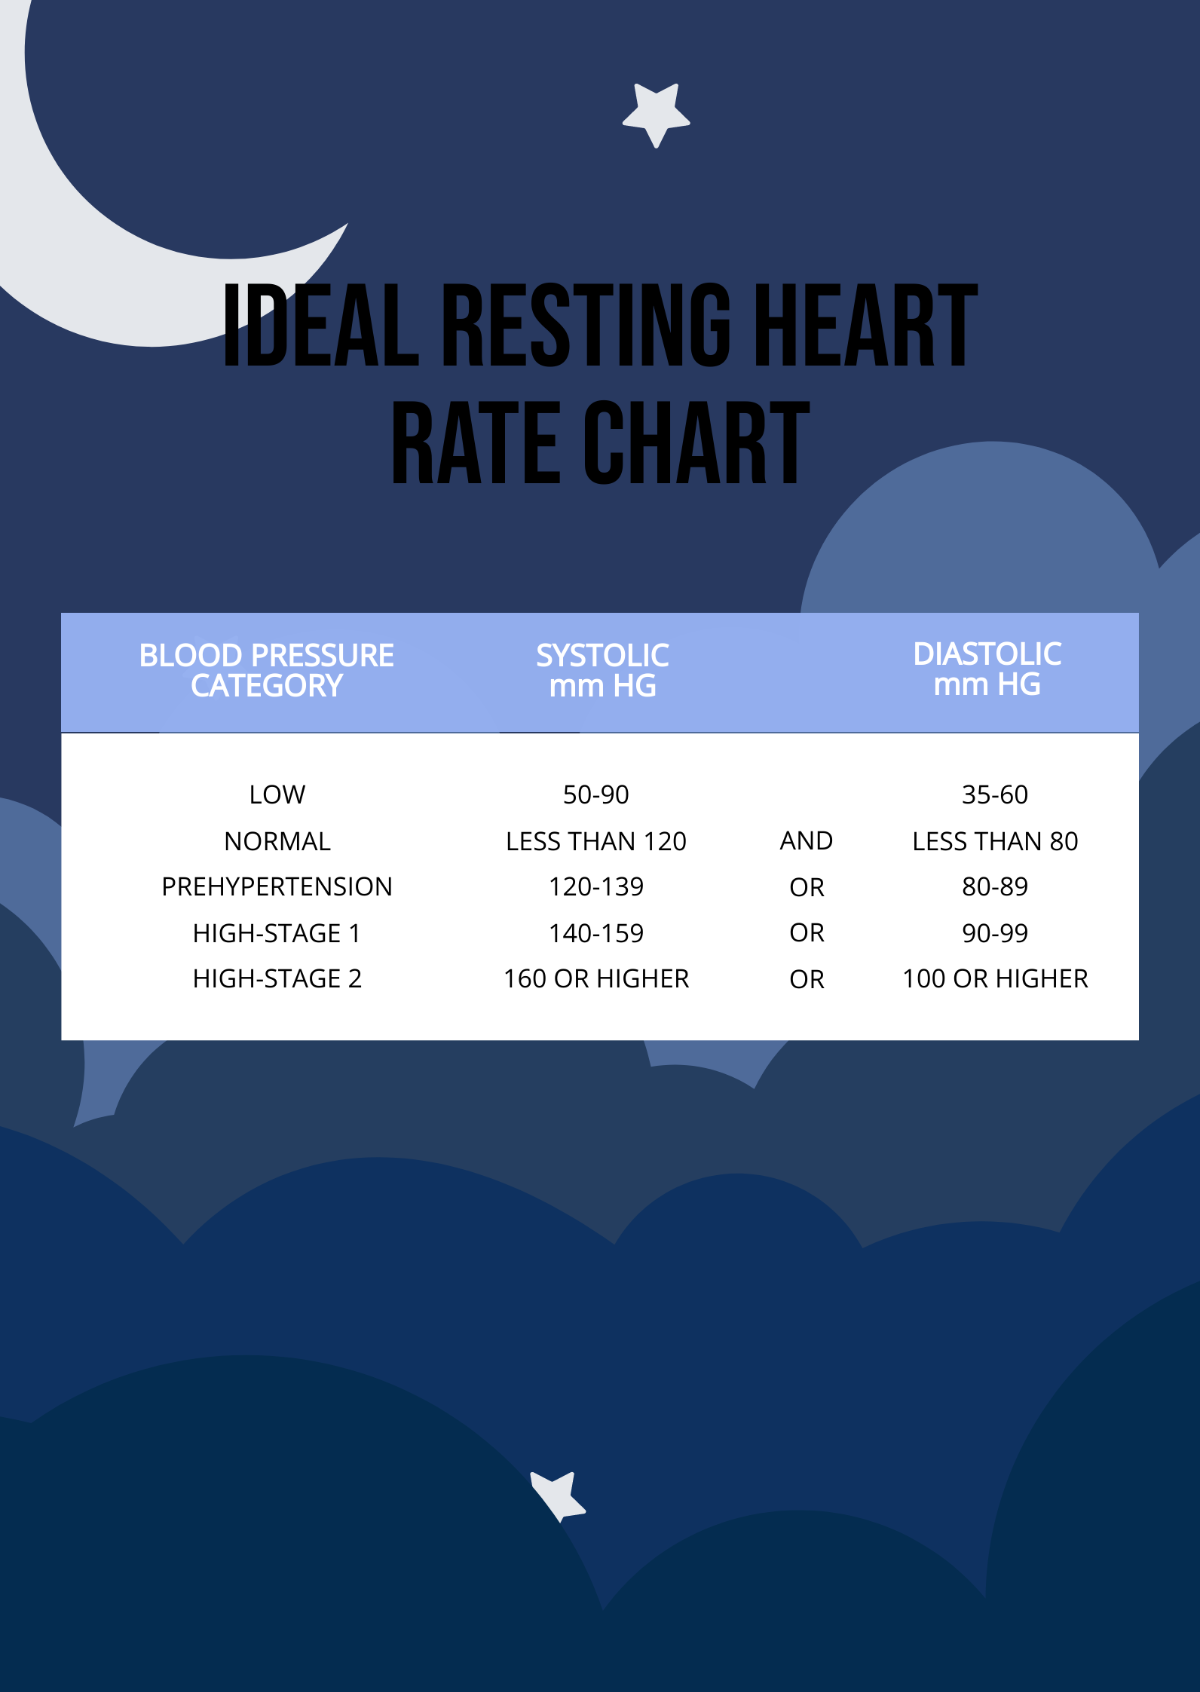 Overweight Resting Heart Rate Chart